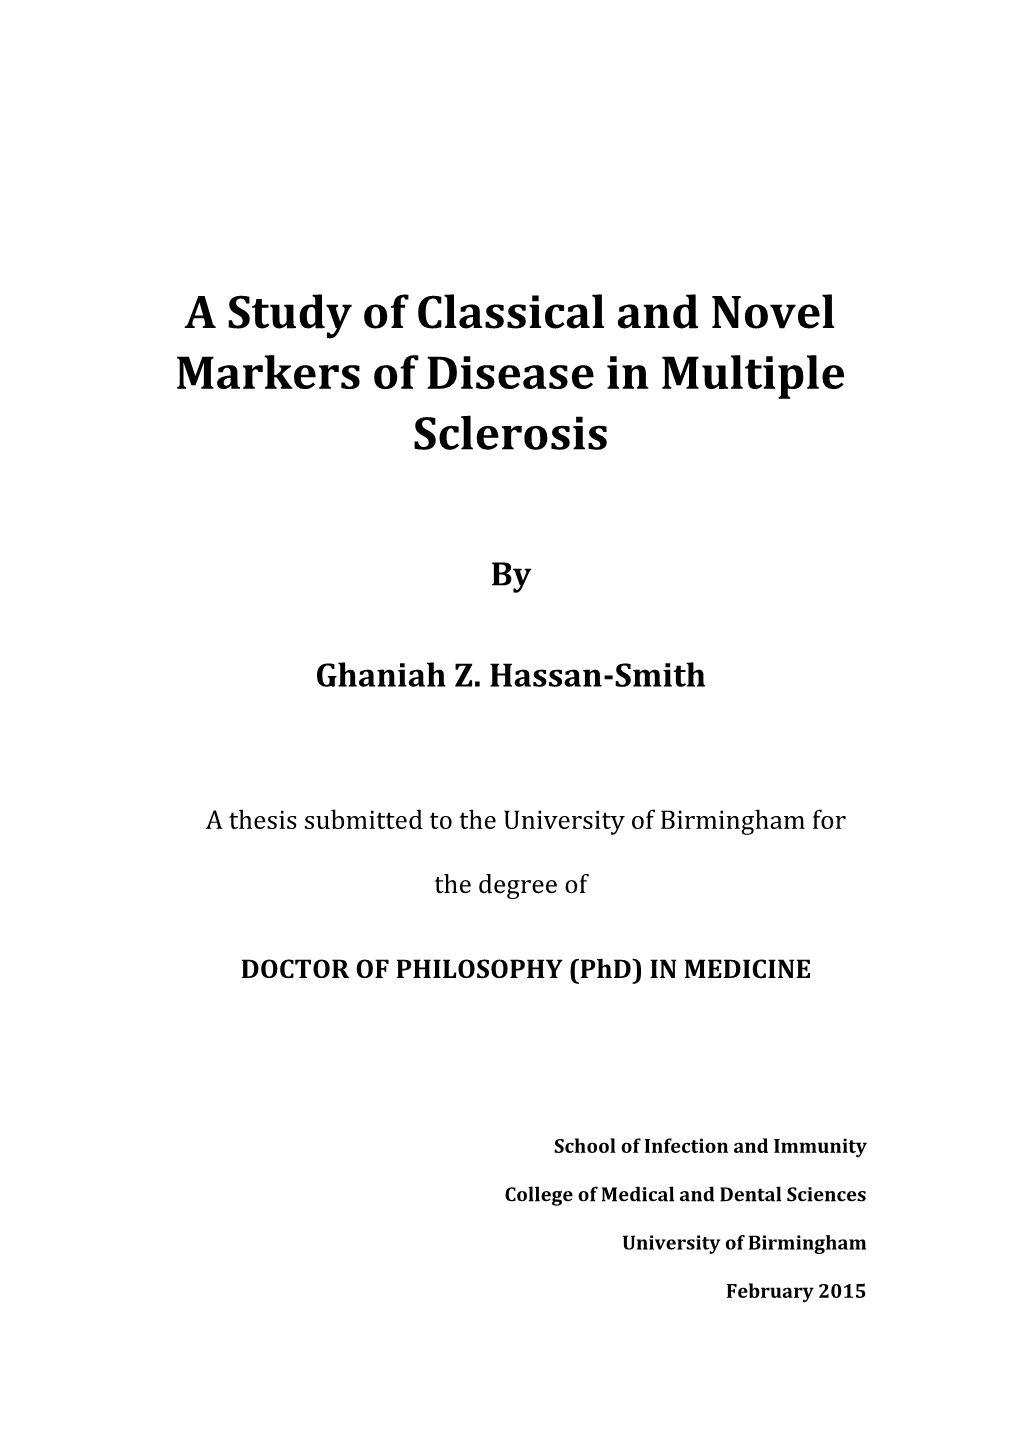 A Study of Classical and Novel Markers of Disease in Multiple Sclerosis